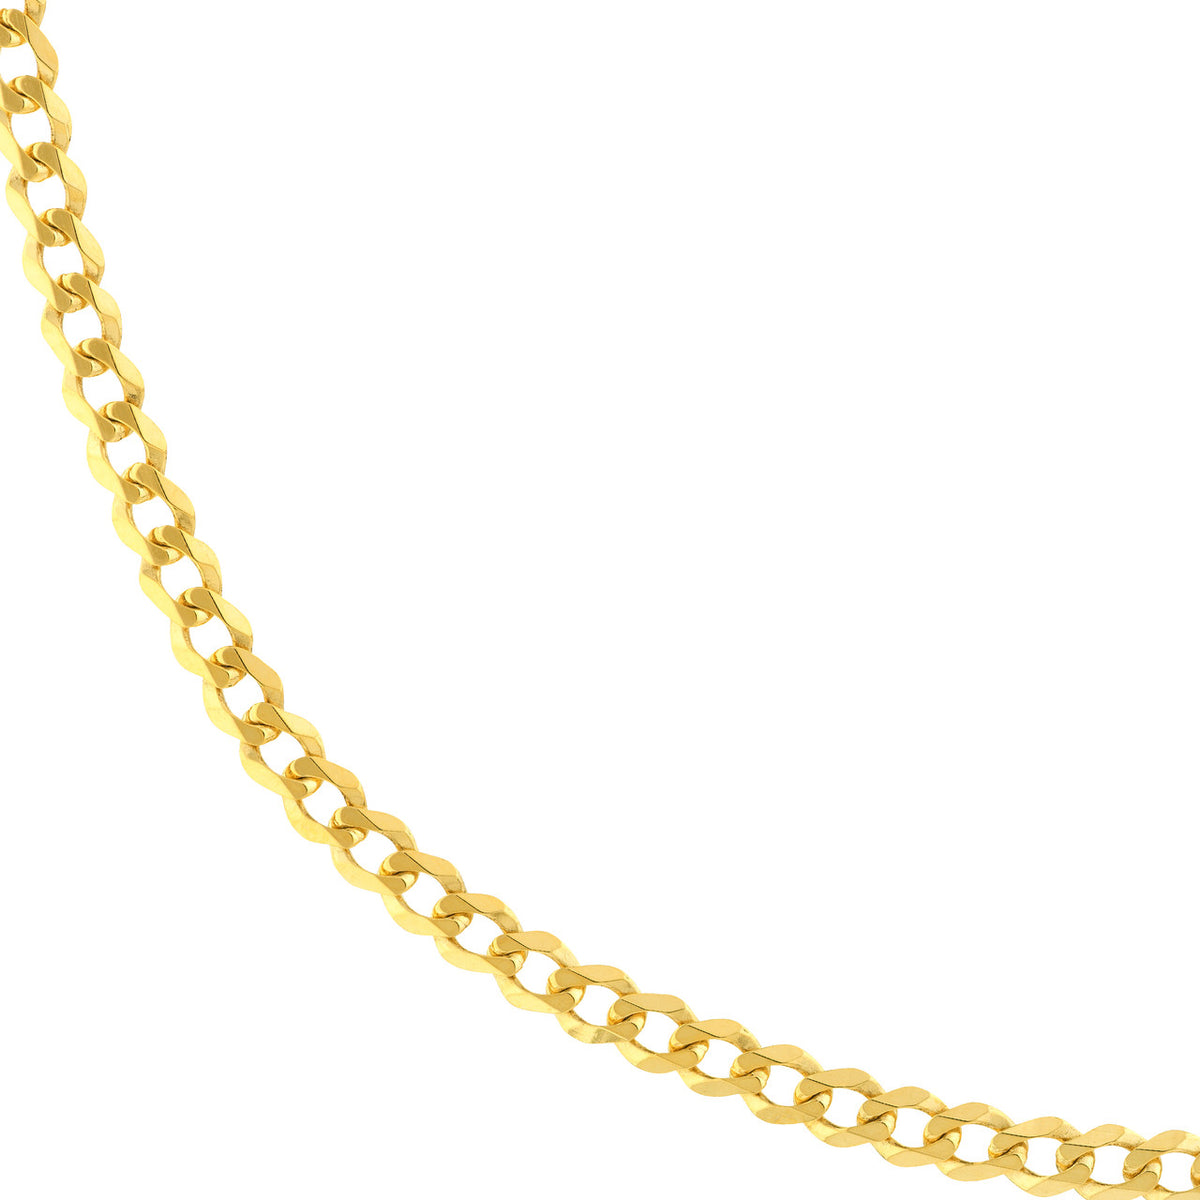 14K Yellow Gold or White Gold 3.7mm Curb Chain Necklace with Lobster Lock